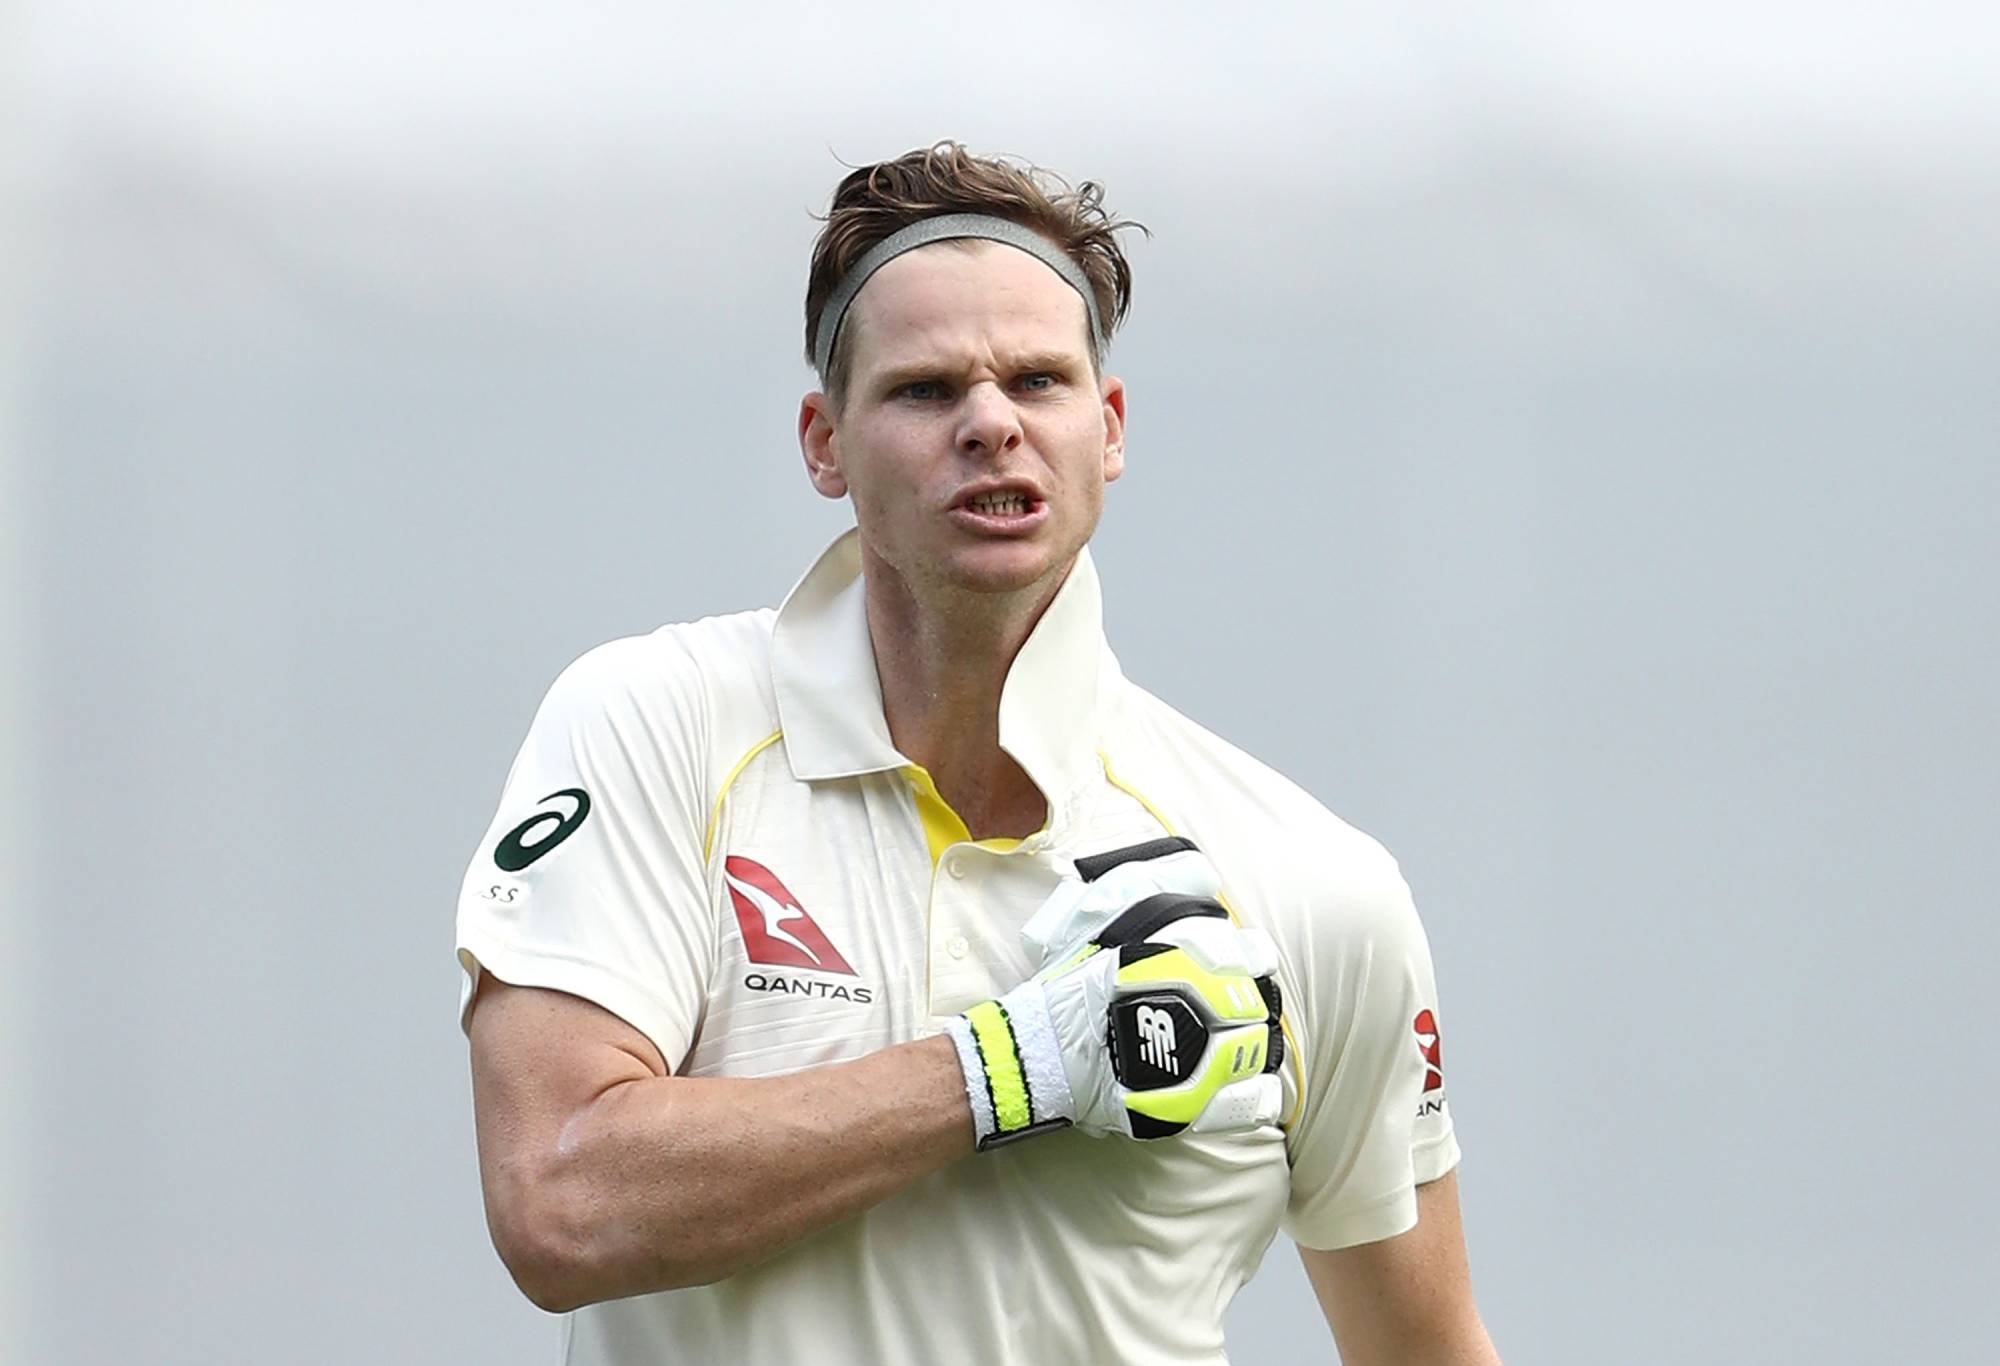 Steve Smith of Australia celebrates after reaching his century during day three of the First Test Match of the 2017/18 Ashes Series between Australia and England at The Gabba on November 25, 2017 in Brisbane, Australia. (Photo by Ryan Pierse/Getty Images)